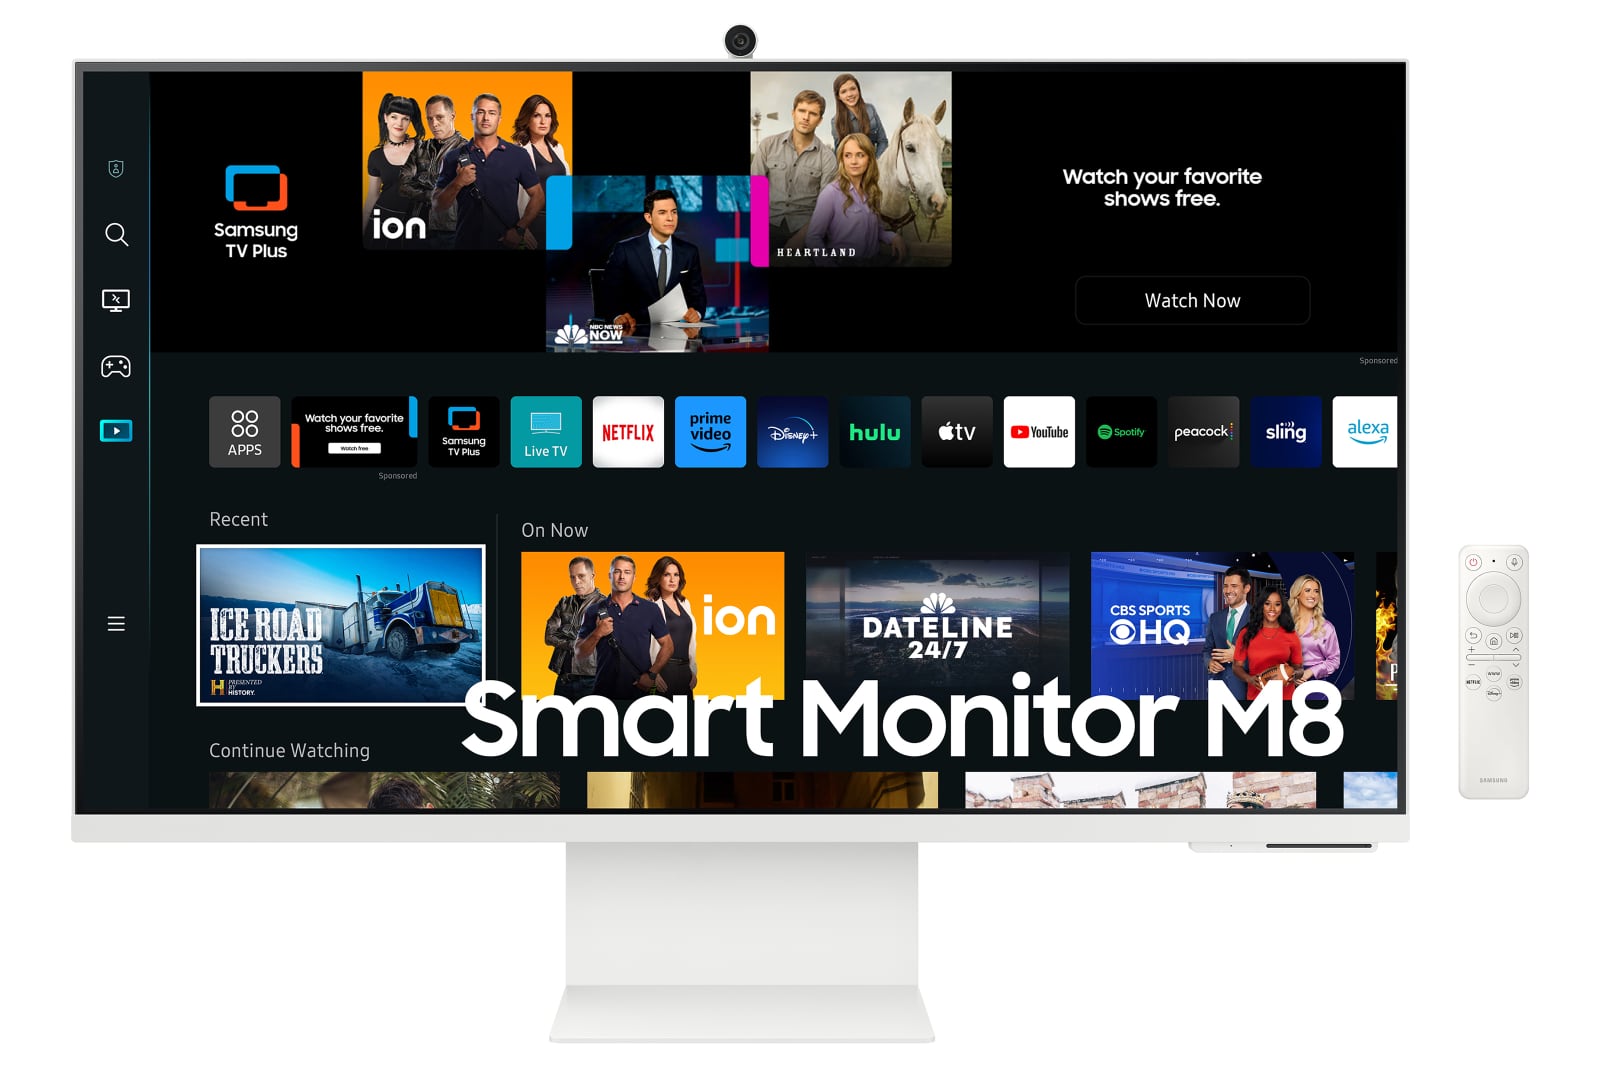 Samsung increase at CES Smart Monitor M8 line-up for 27" and 32" models in four colors